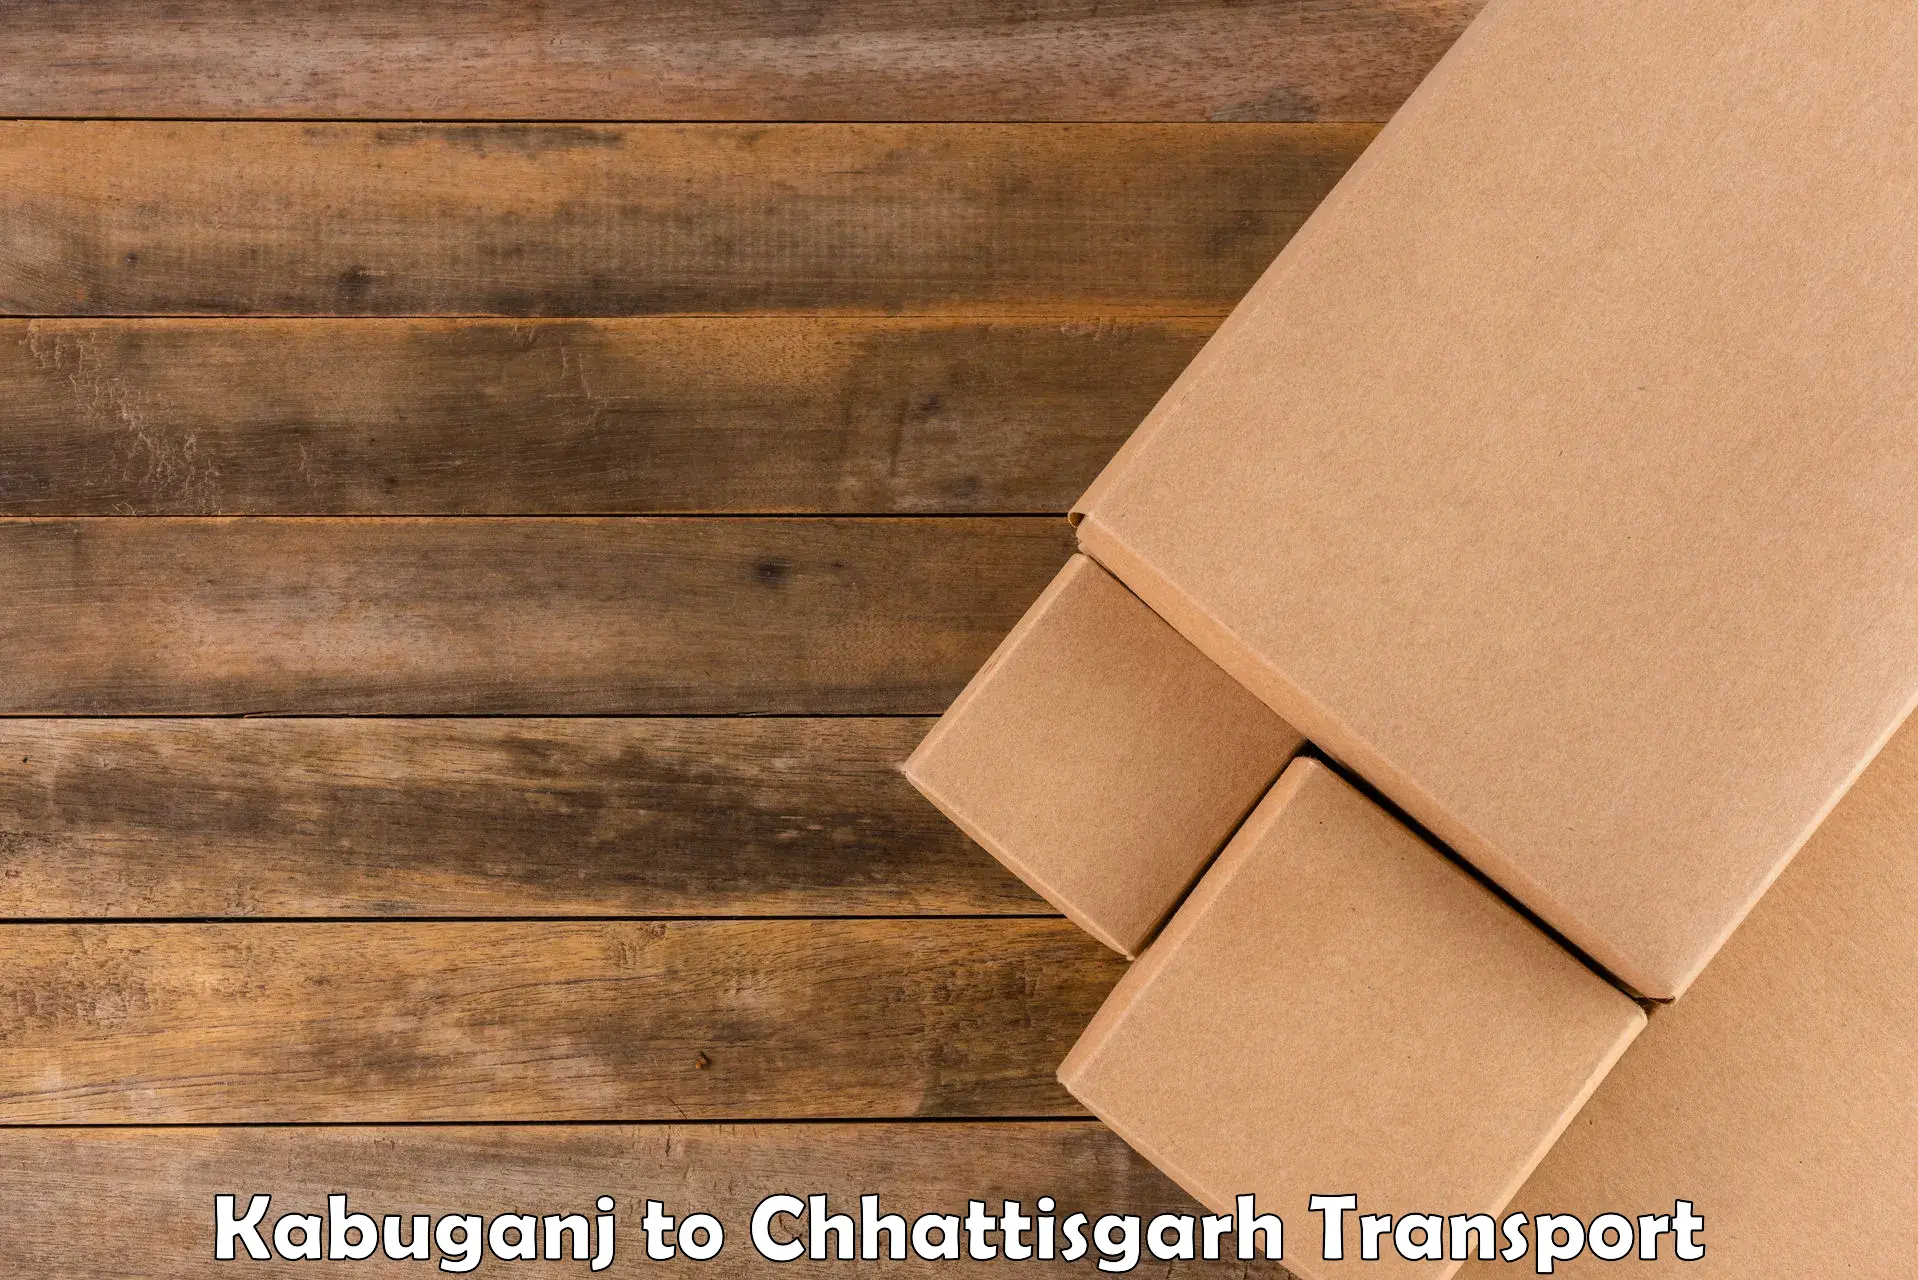 Commercial transport service Kabuganj to Raigarh